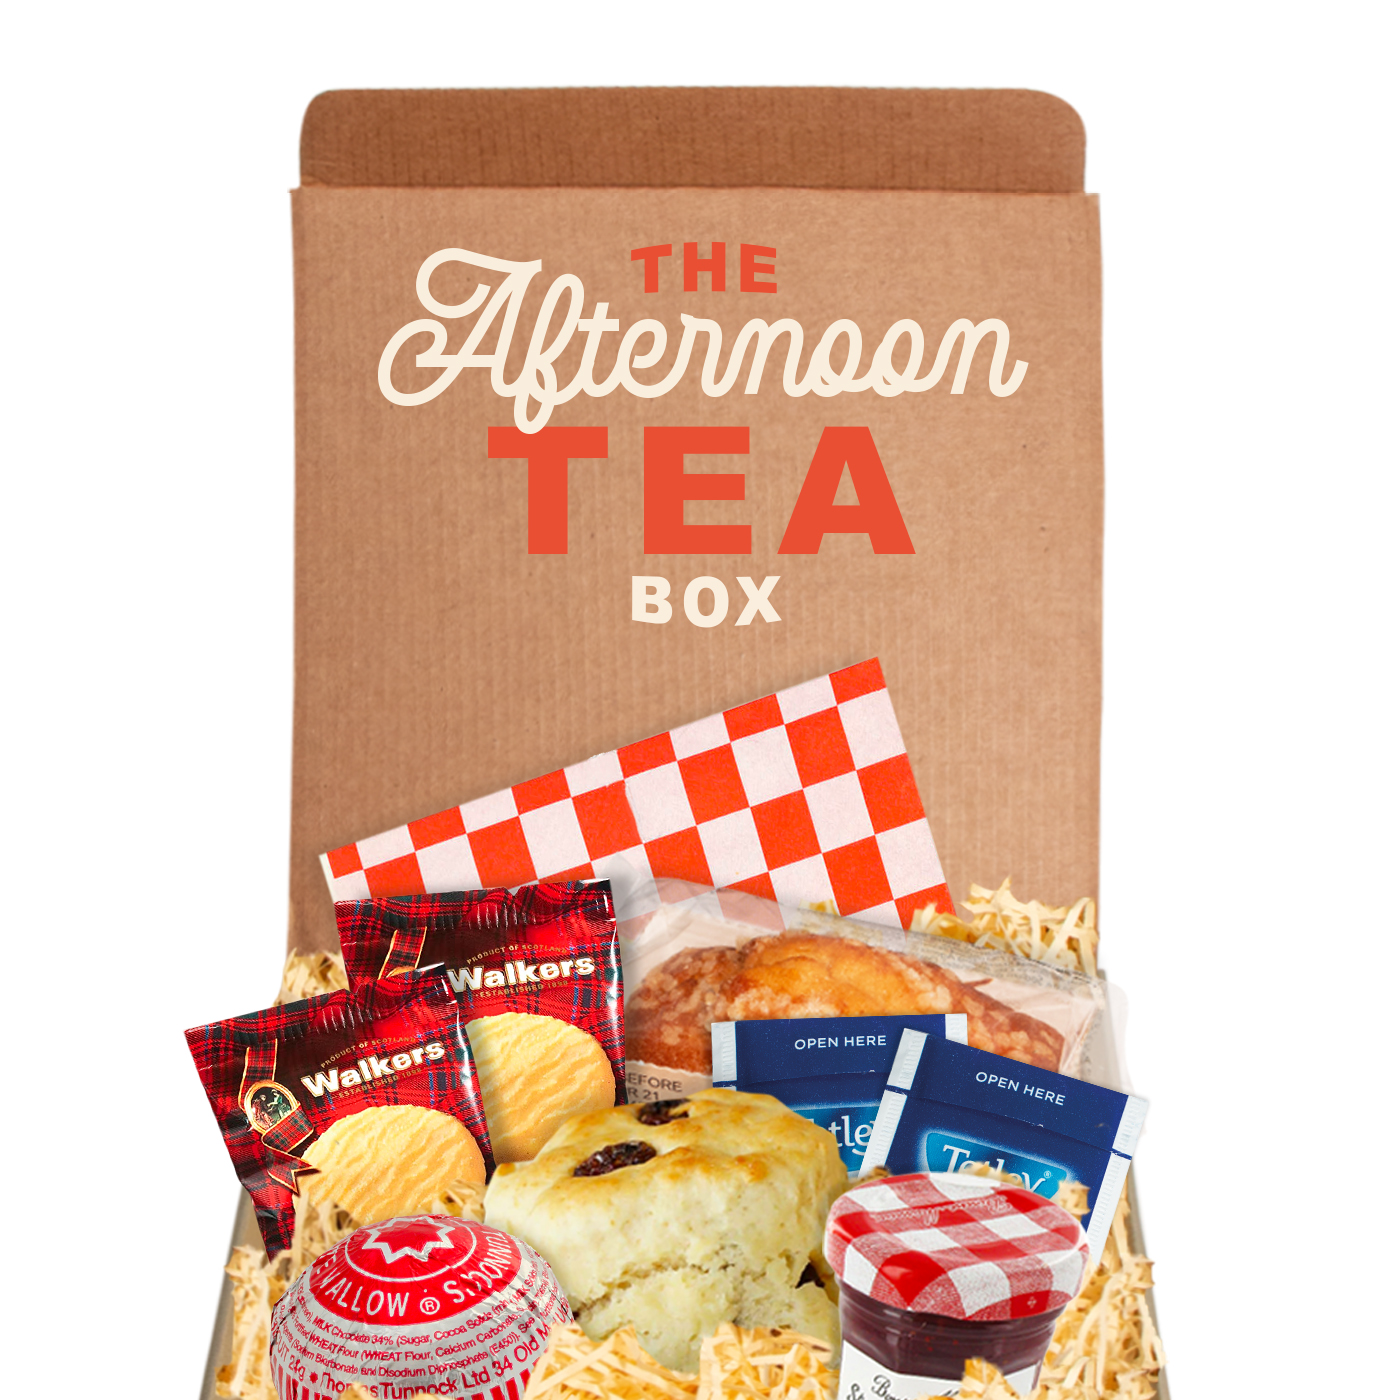 Gift Boxes – Square Gift Box - Afternoon Tea